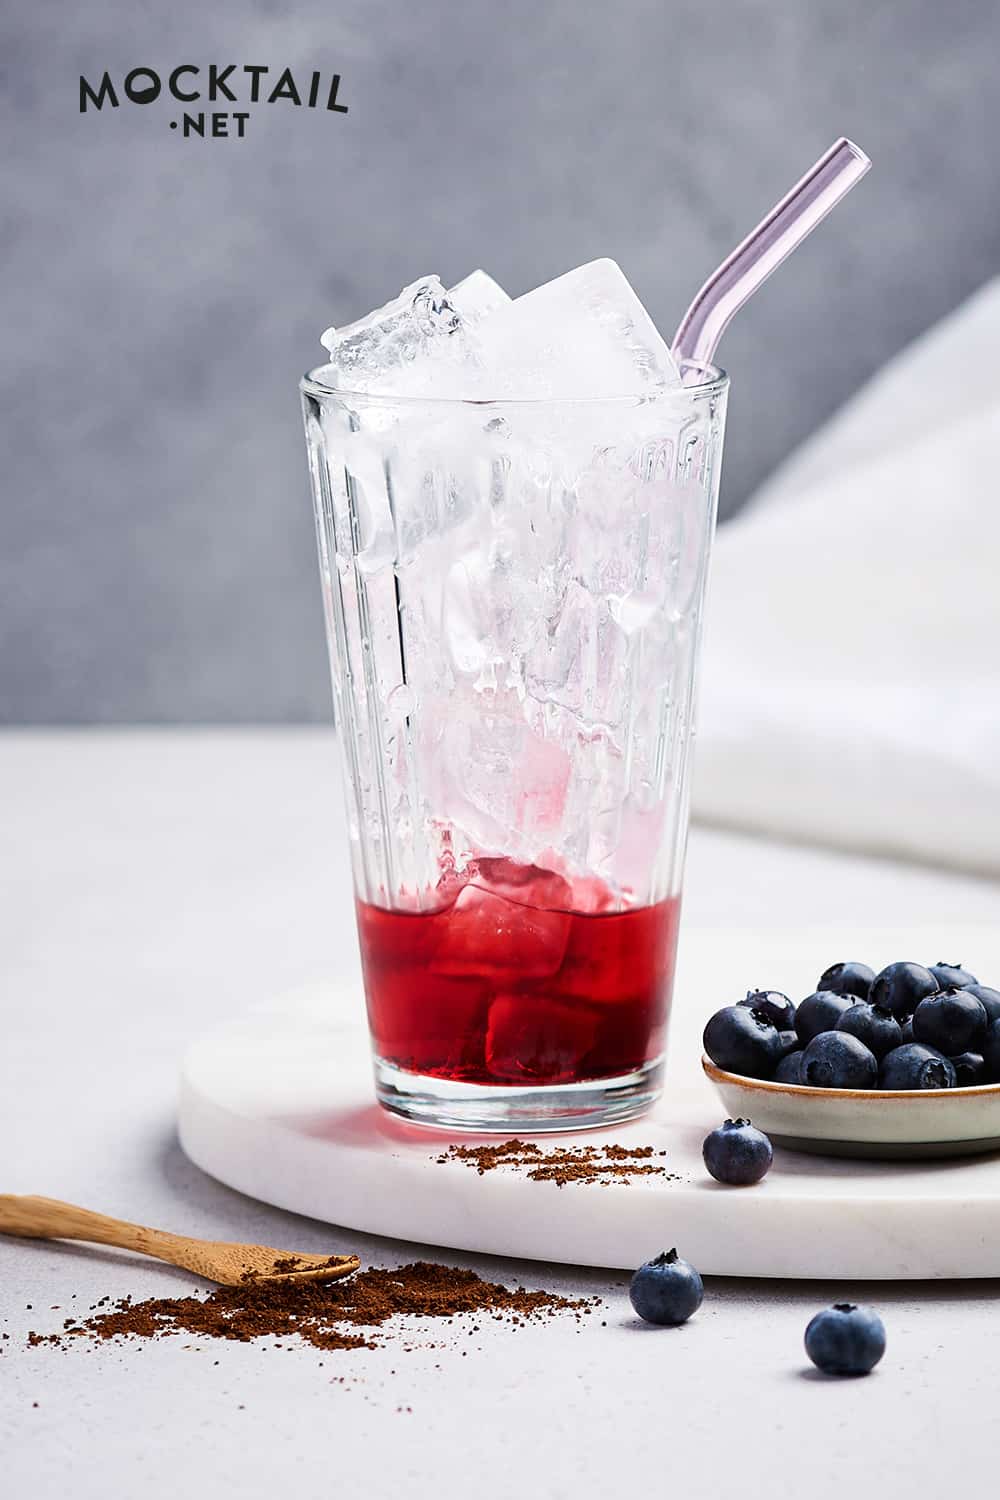 How to Make Blueberry Coffee Syrup